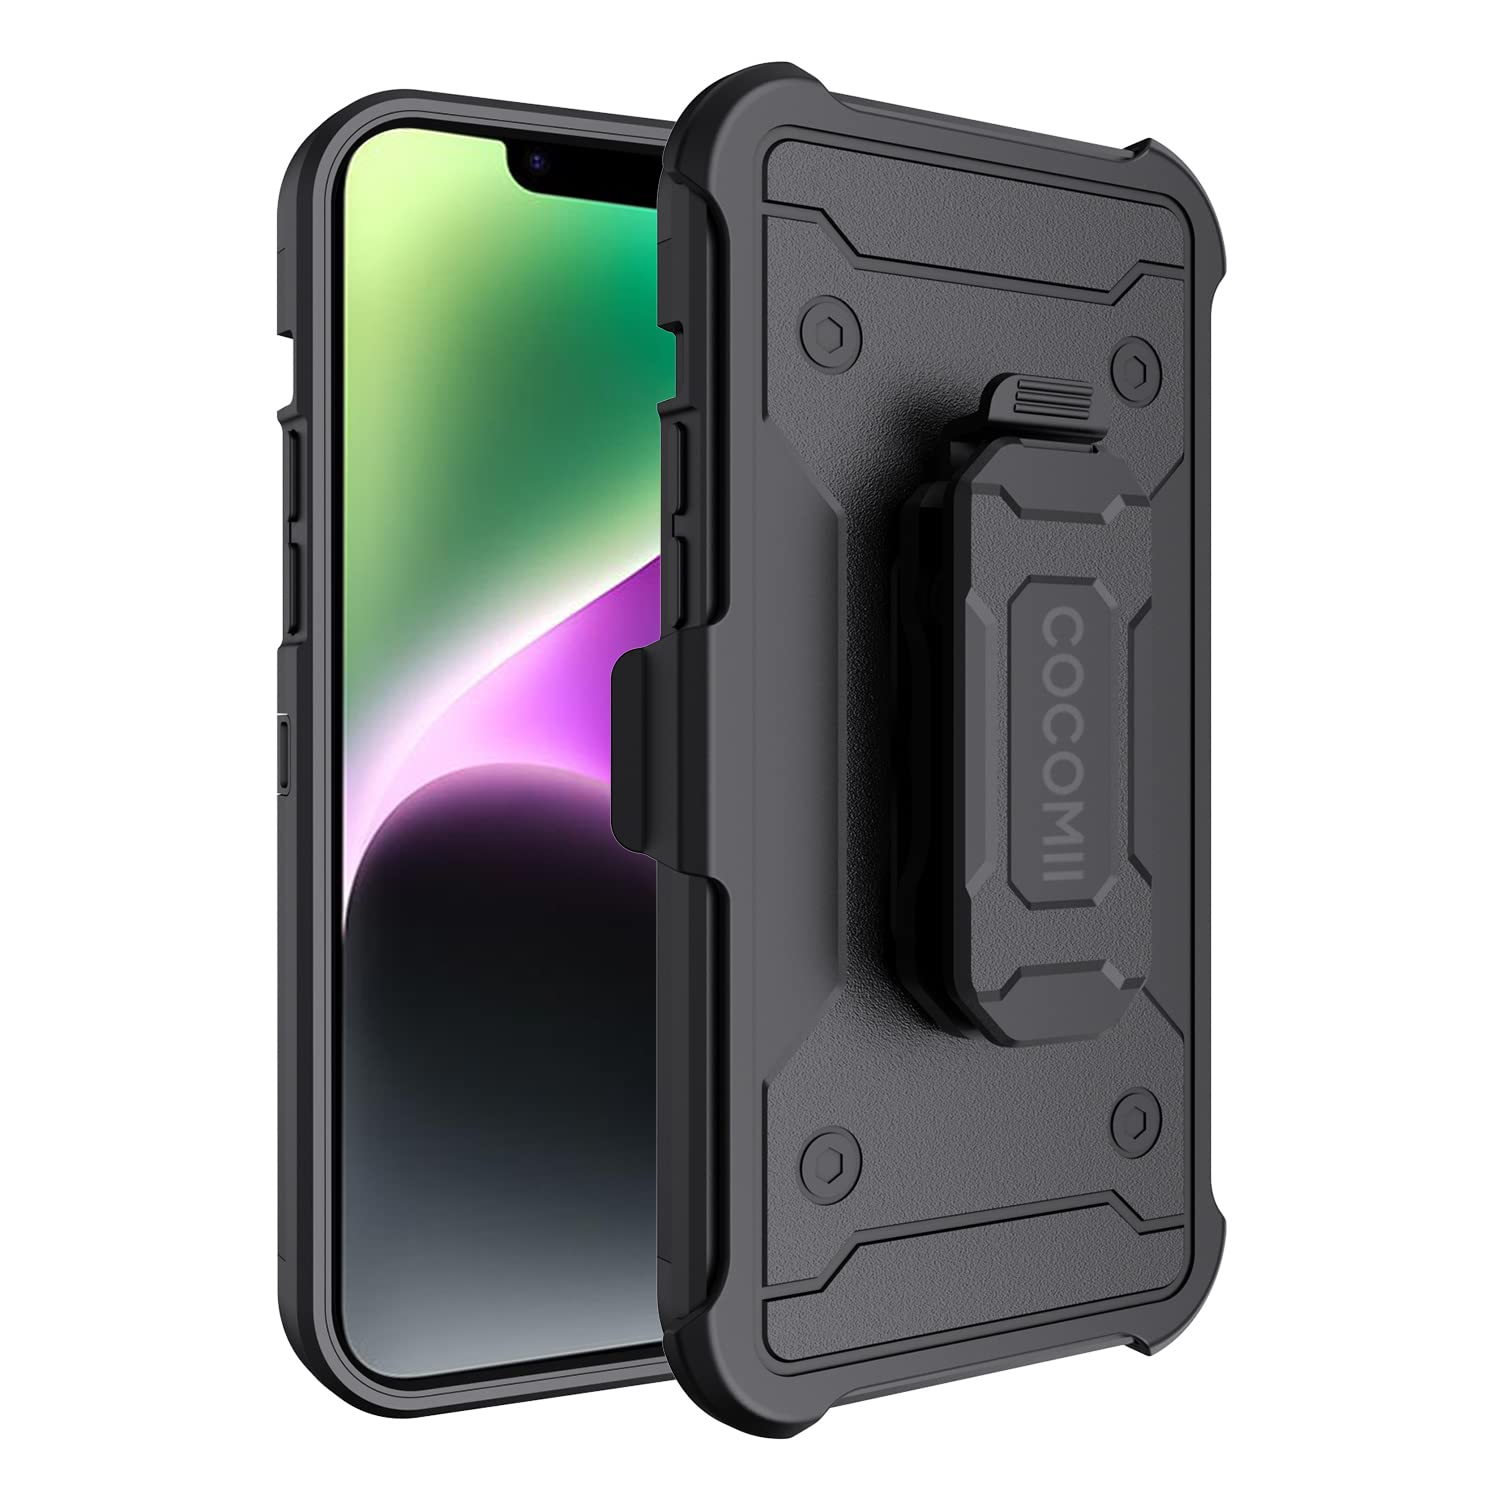 Cocomii Belt Clip iPhone SE 2022/SE 2020/iPhone 8/7/6 Case - Swivel Holster, in & Out Facing, Kickstand, Military Grade, Heavy Duty, Shockproof - Compatible with iPhone SE 2022/2020/8/7/6 (Black)